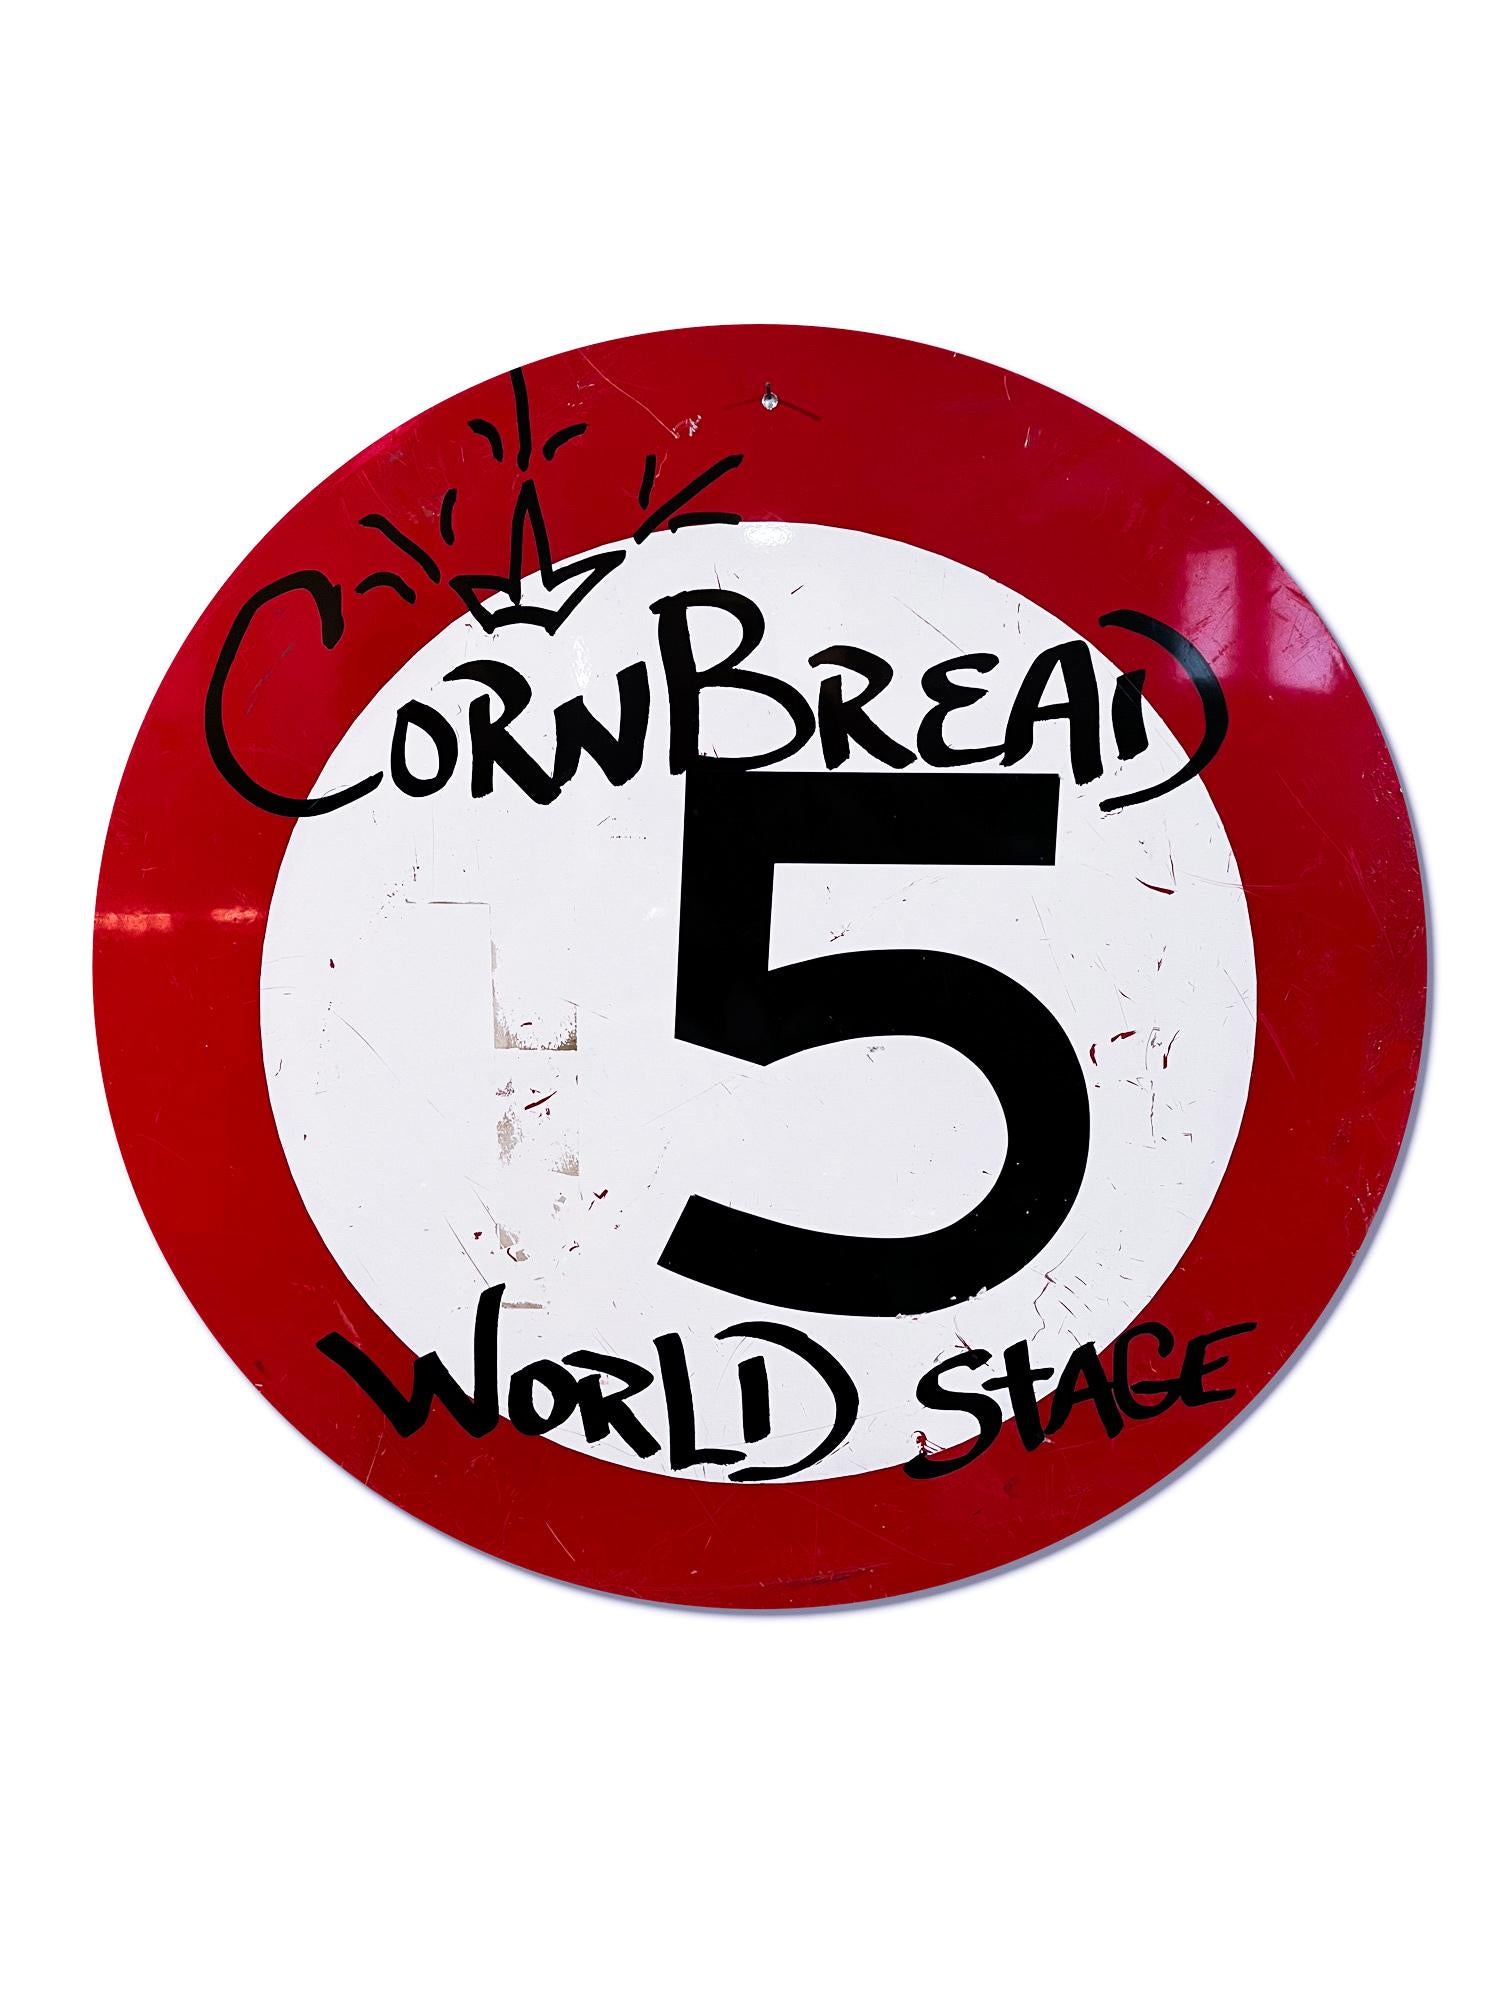 This artwork titled "Cornbread World Stage Shield" is an original artwork by Cornbread made of acrylic paint on a retired Amsterdam street sign. The piece measures 60cm / 23.5in diameter. 

Darryl McCray, known by his tagging name, “Cornbread,” is a